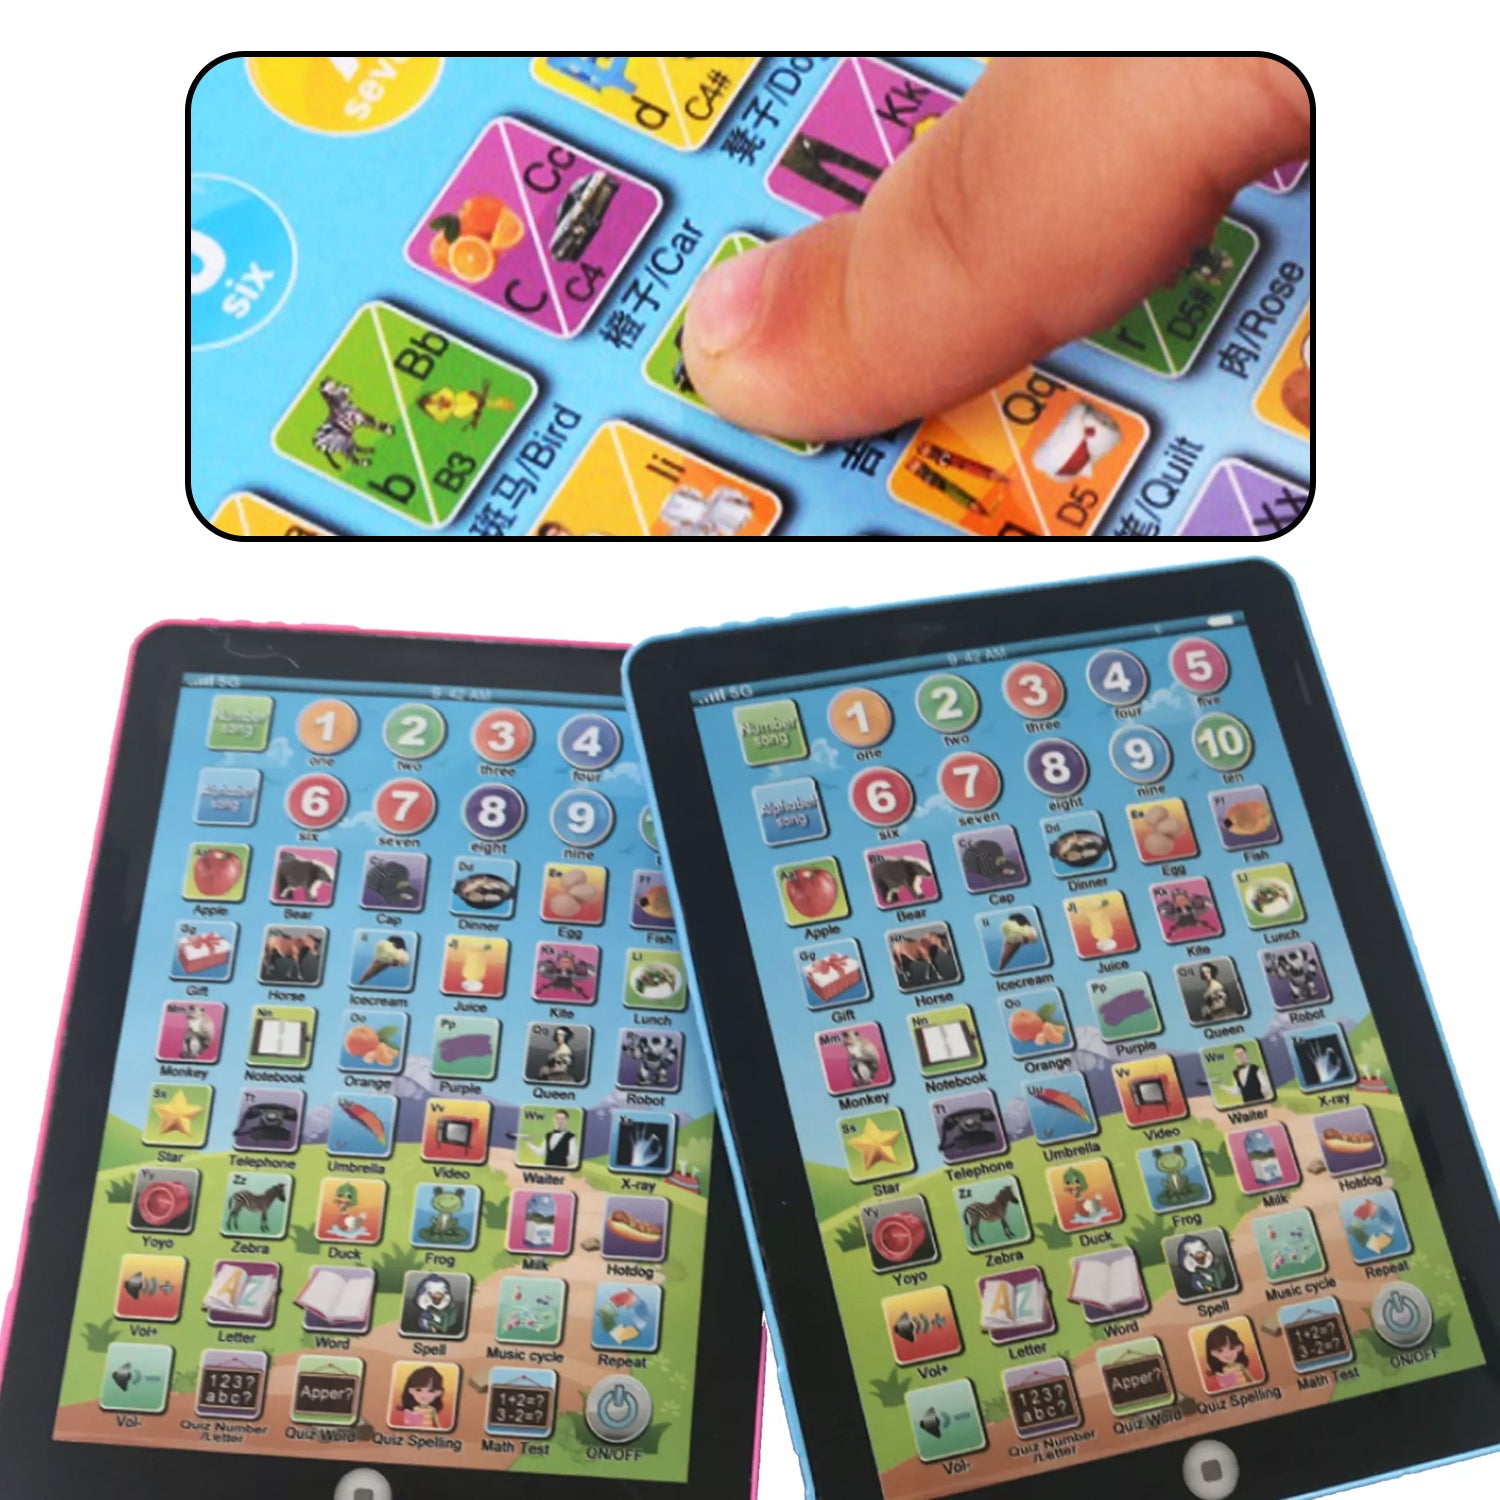 8086 Kids Learning Tablet Pad For Learning Purposes Of Kids And Childrens. DeoDap